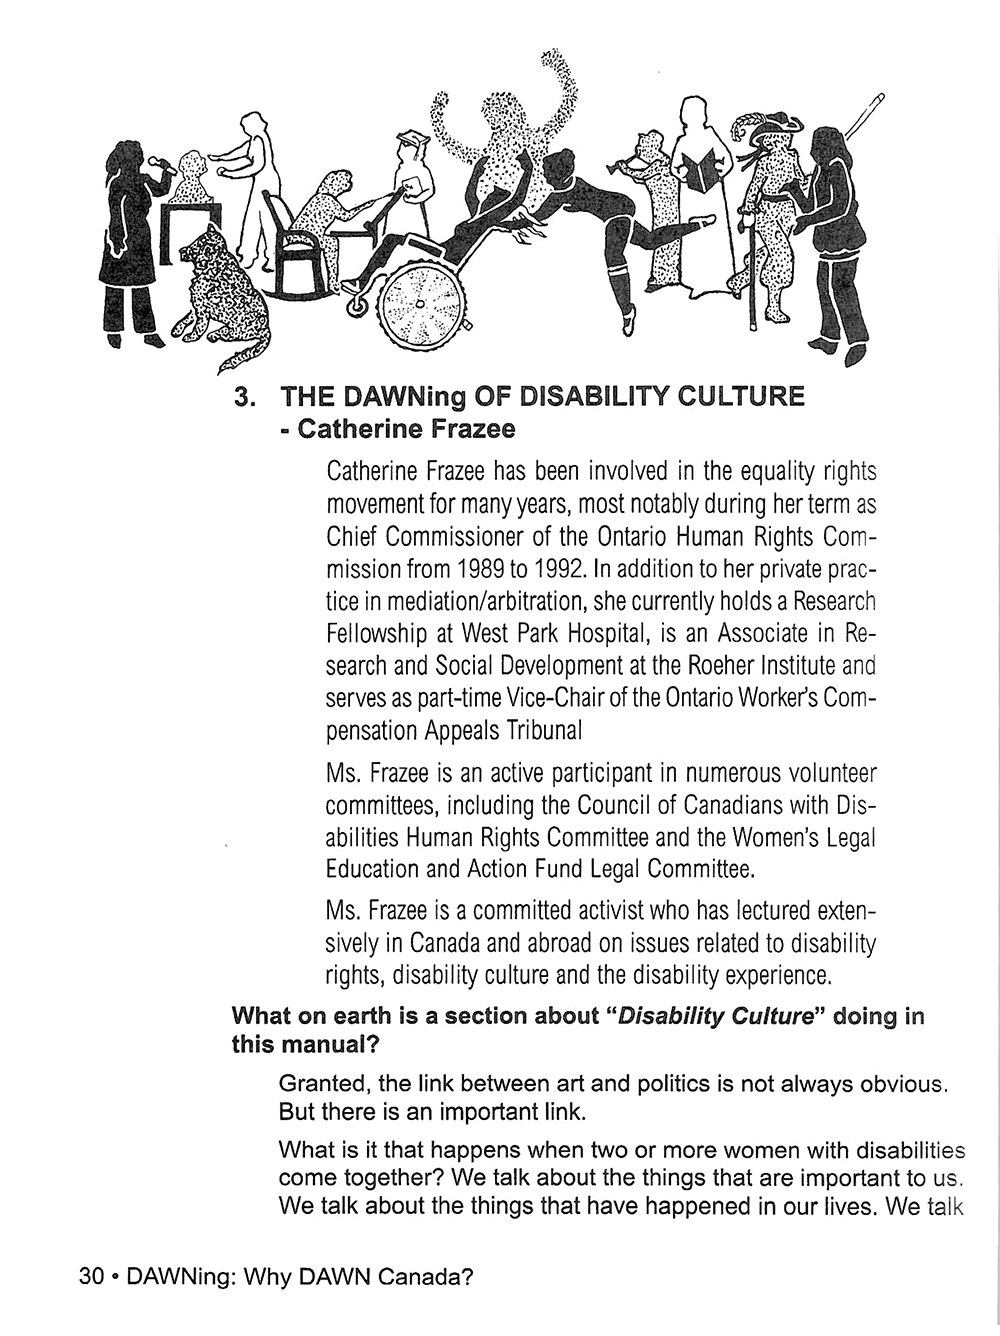 Scan of the article "The DAWNing of disability culture" by Catherine Frazee